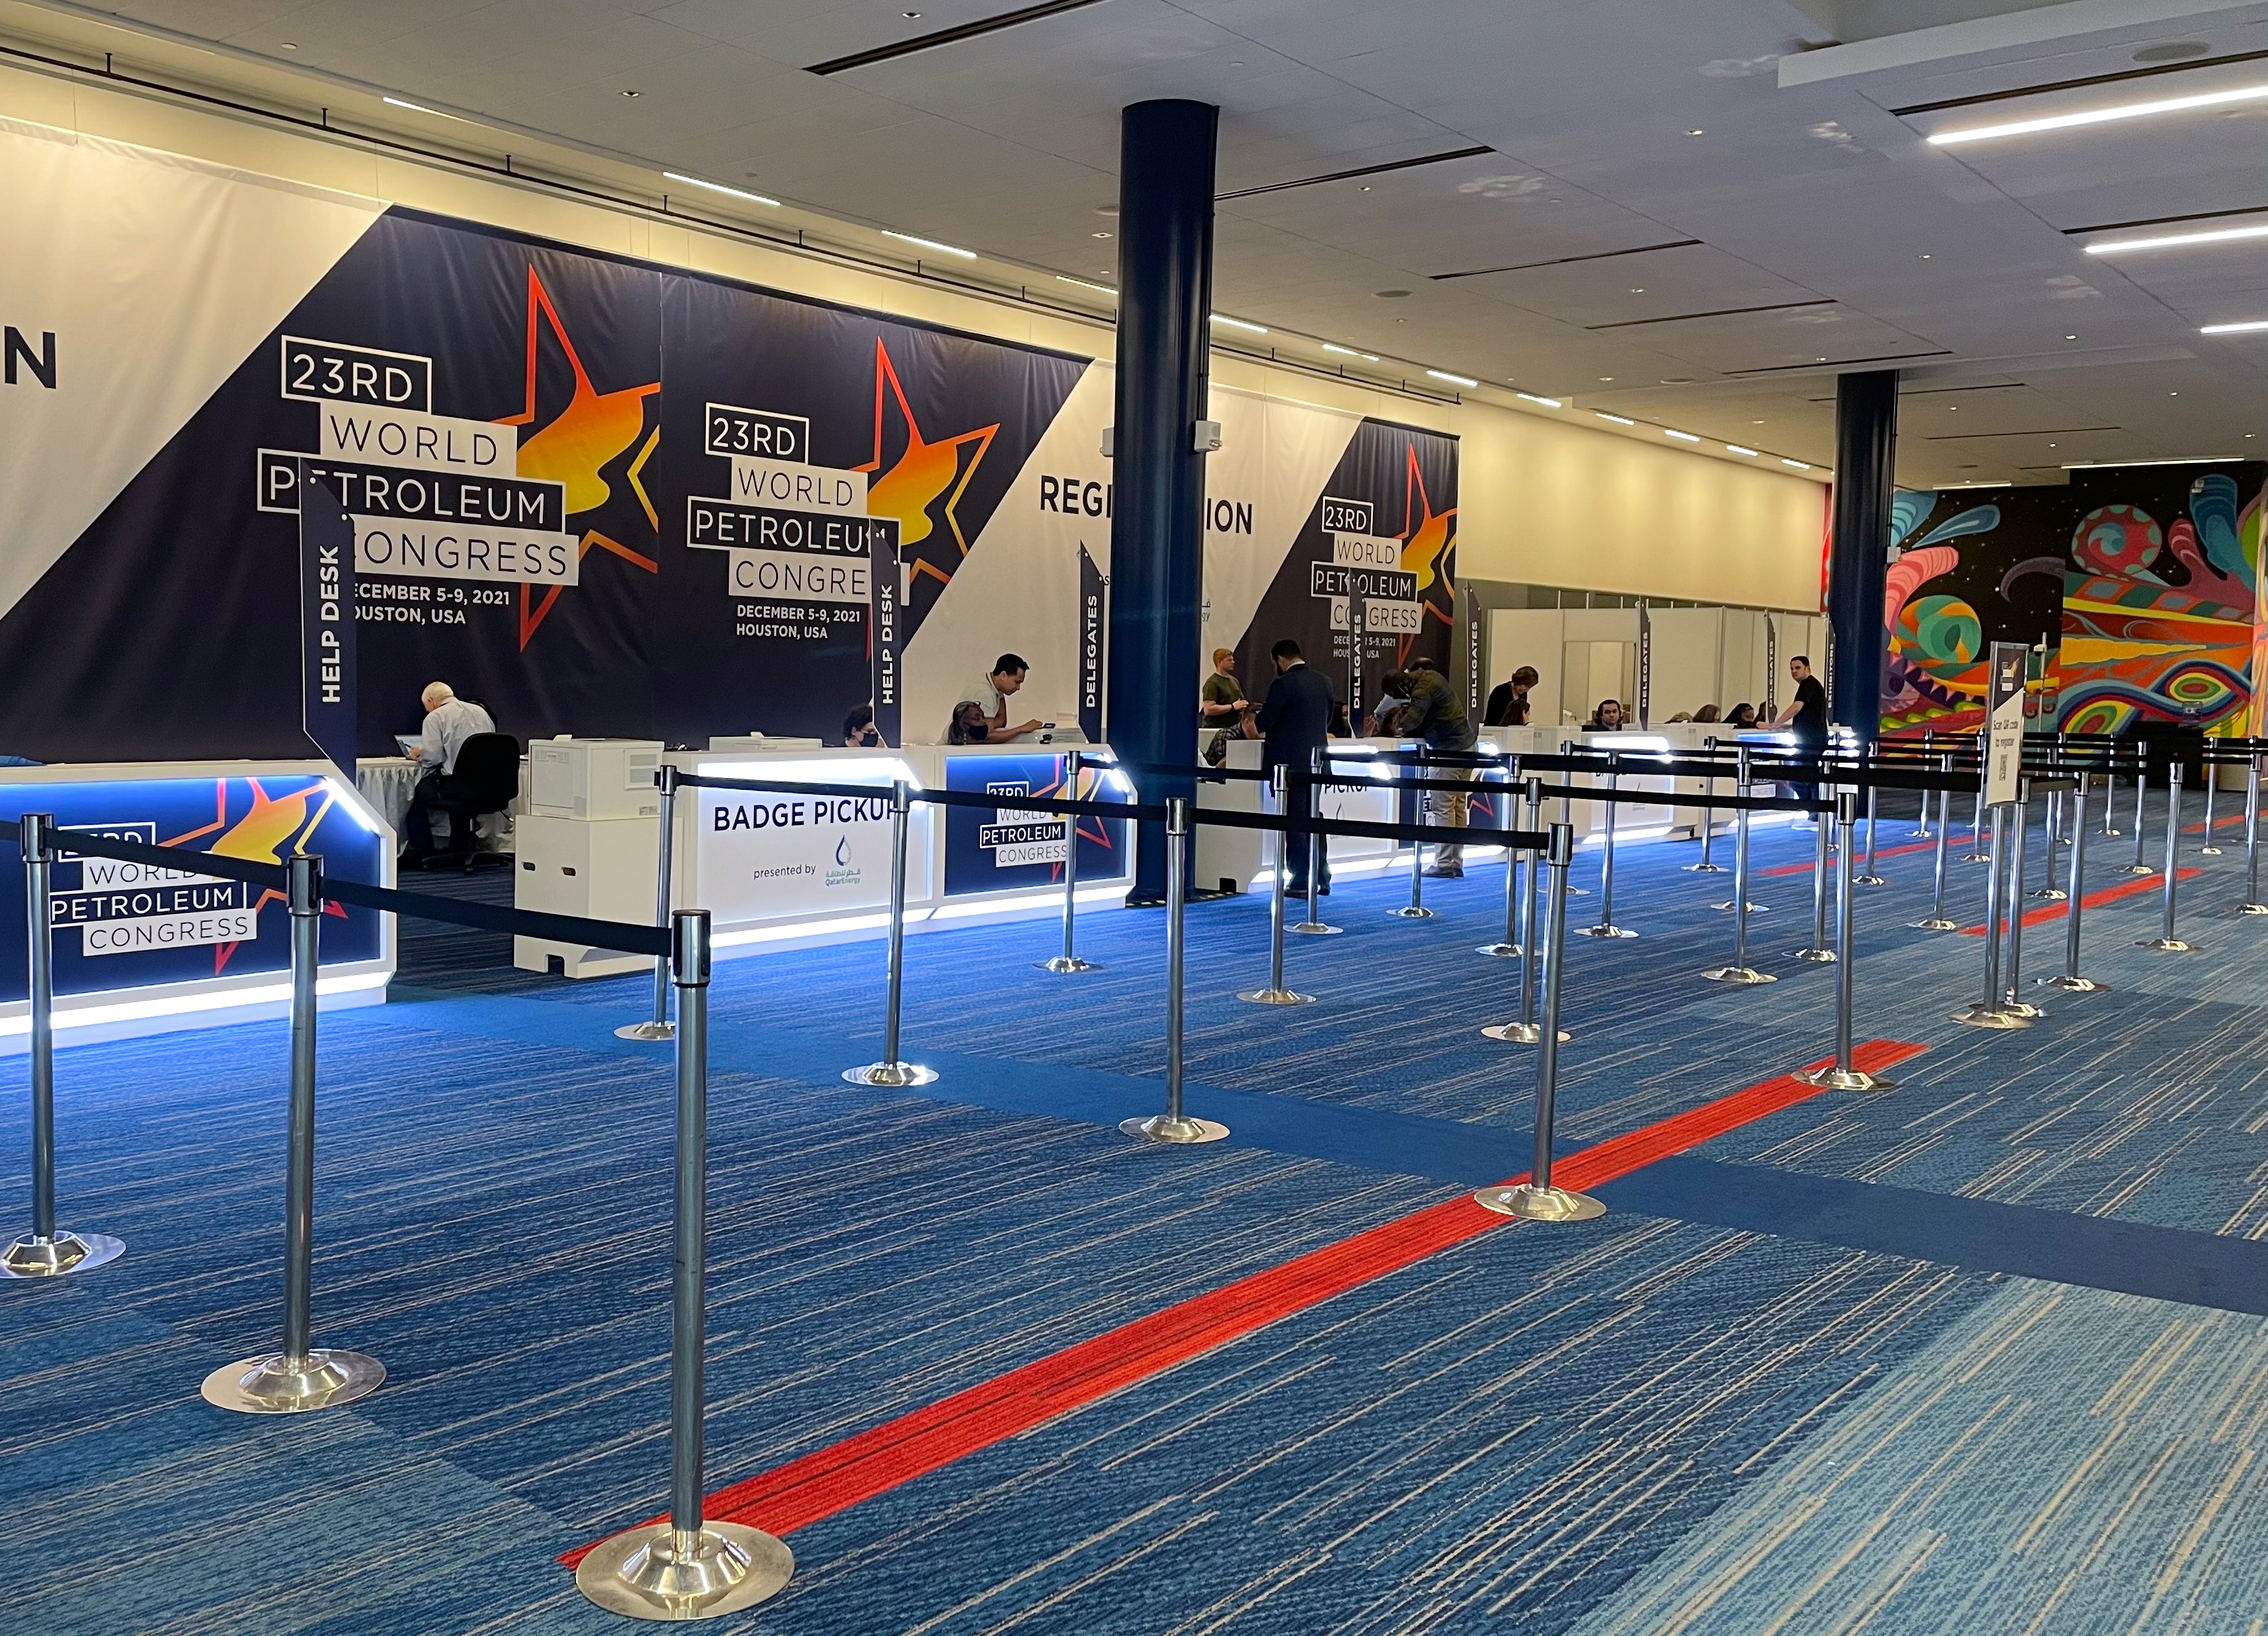 A view of a quiet registration desk for the World Petroleum Congress in Houston, Texas, U.S. on December 5, 2021 as organizers grappled with the fallout of new coronavirus disease (COVID-19) travel restrictions. REUTERS/Sabrina Valle